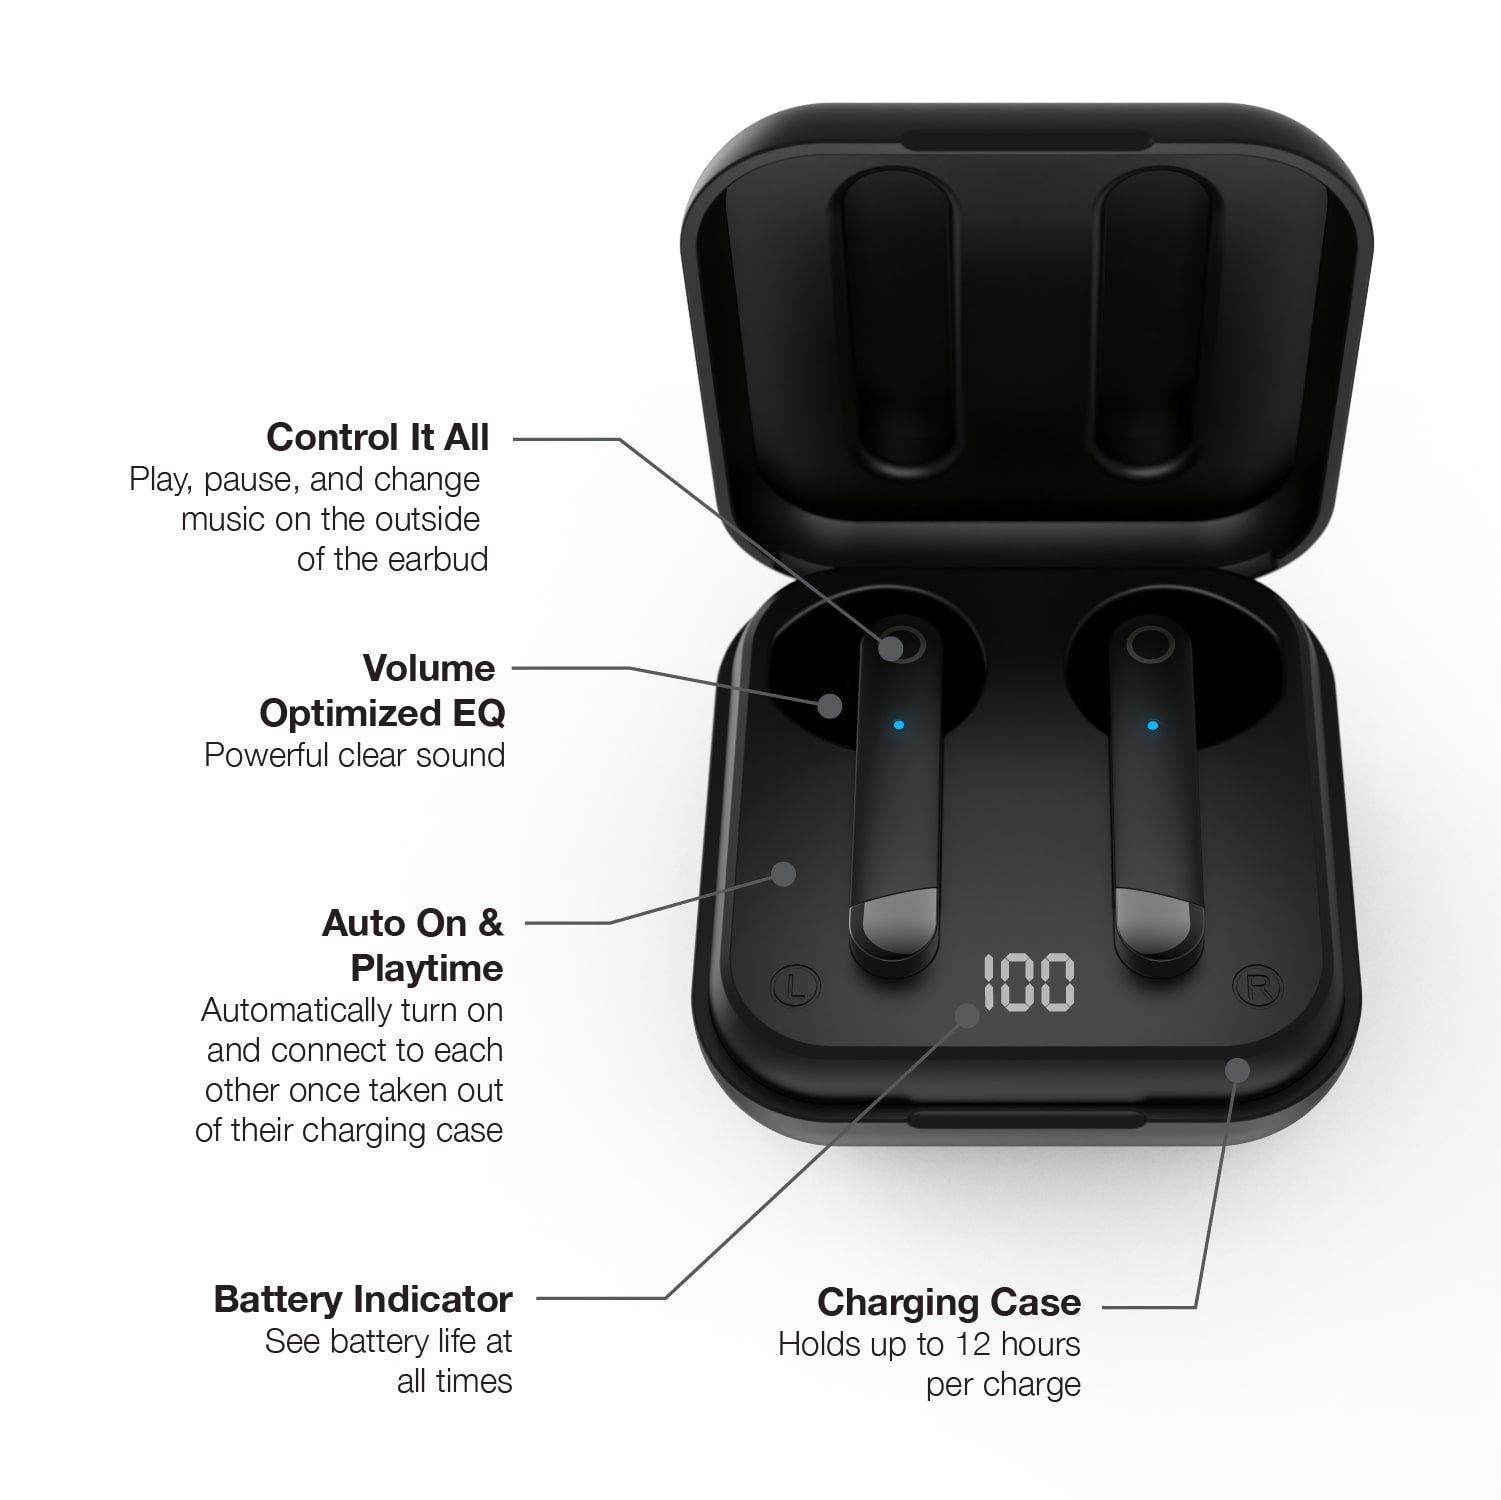 iTouch Amp Plus Earbuds: Black/Gunmetal affordable wireless ear buds